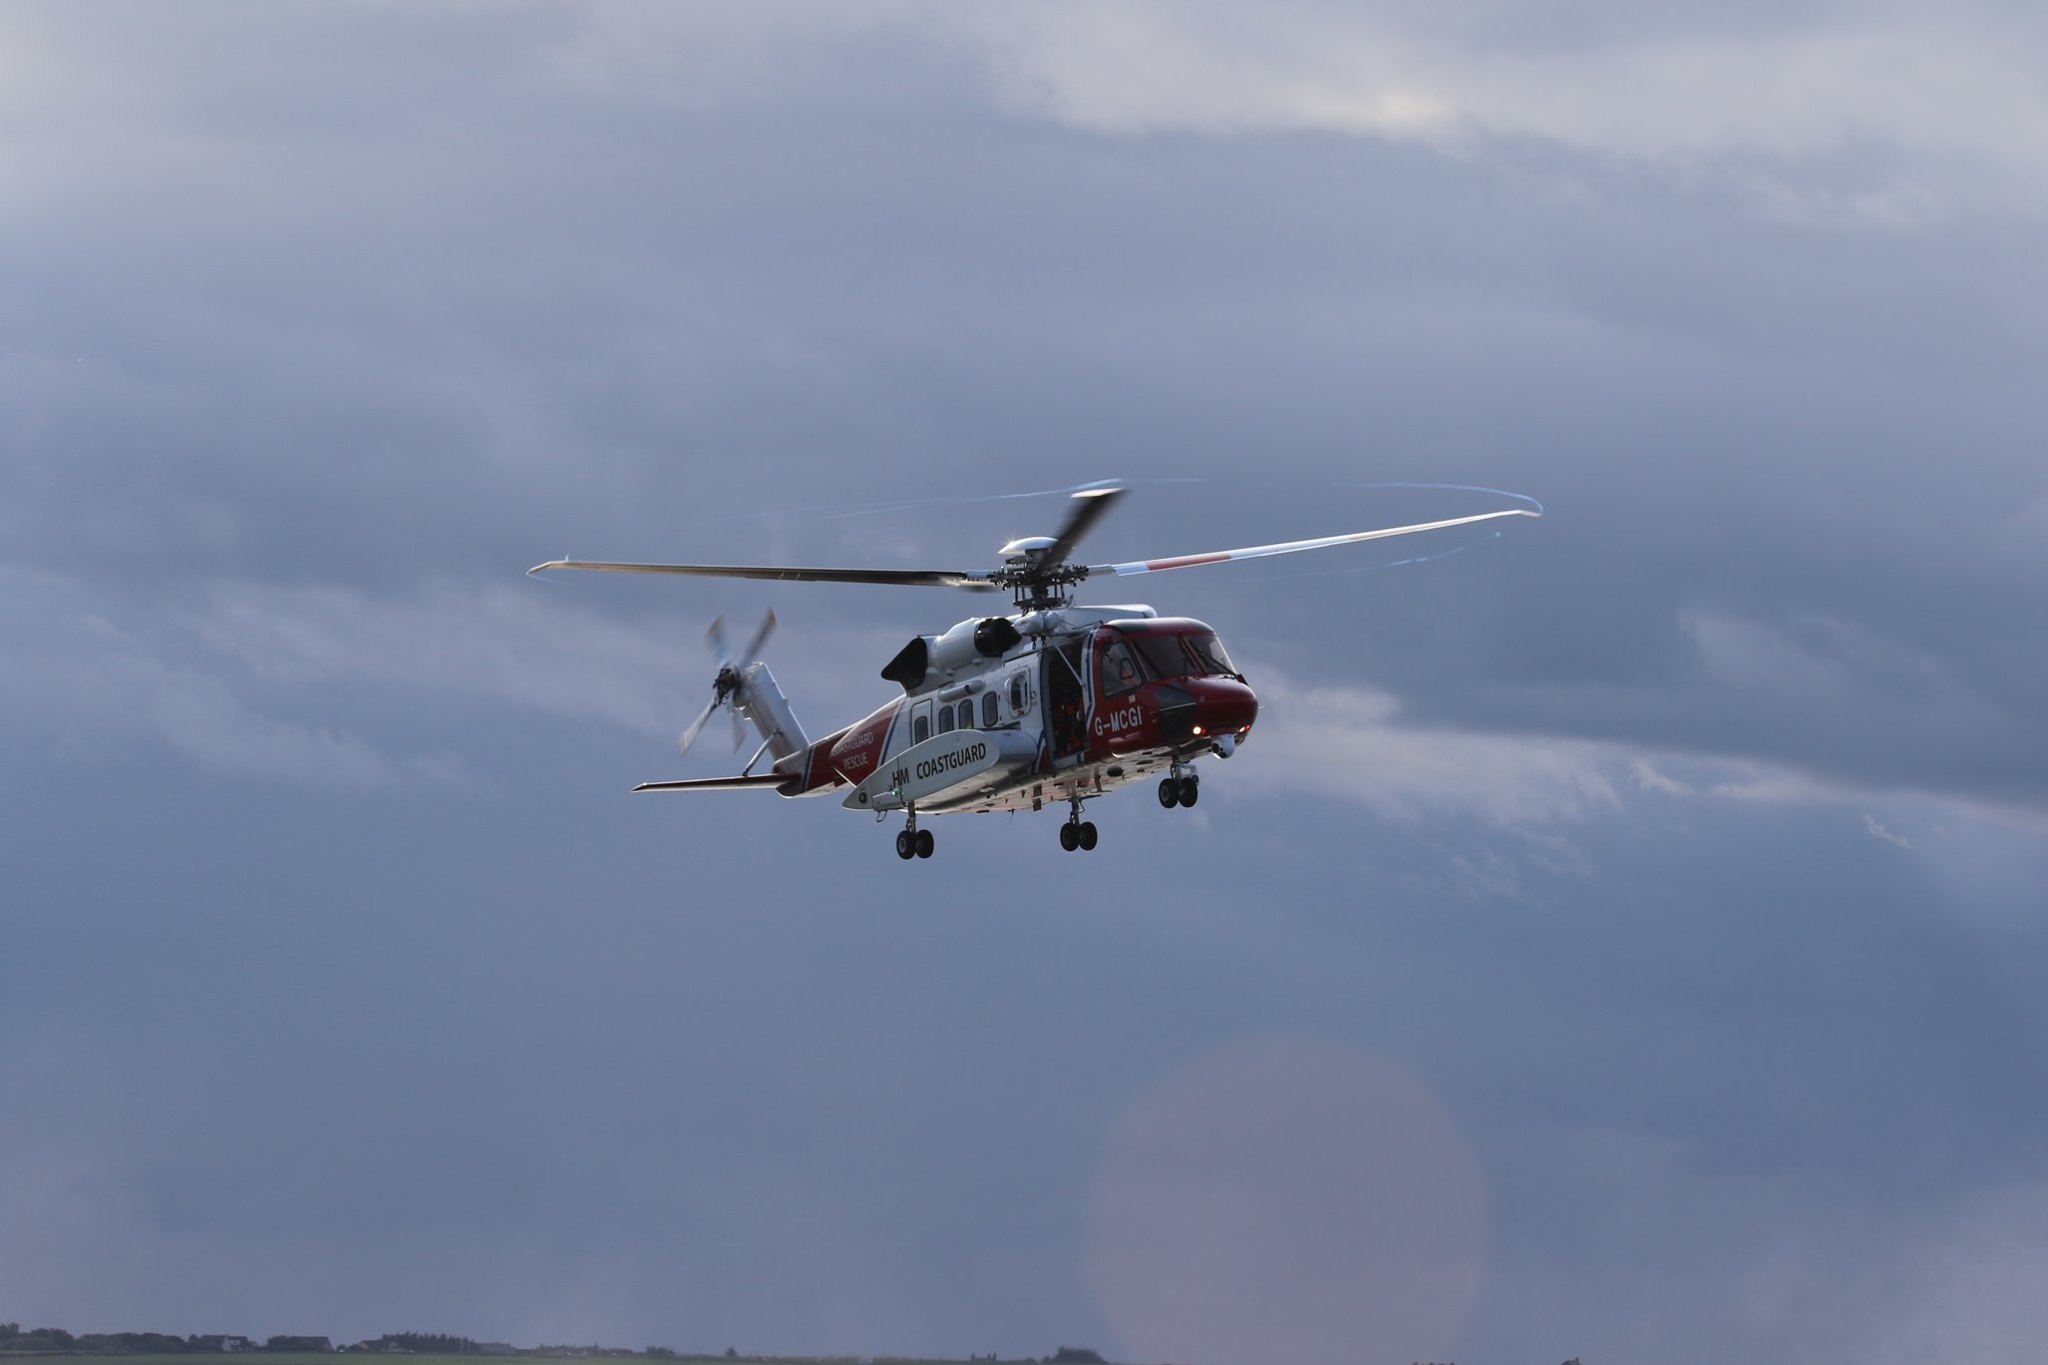 Coastguard helicopter is aiding the search